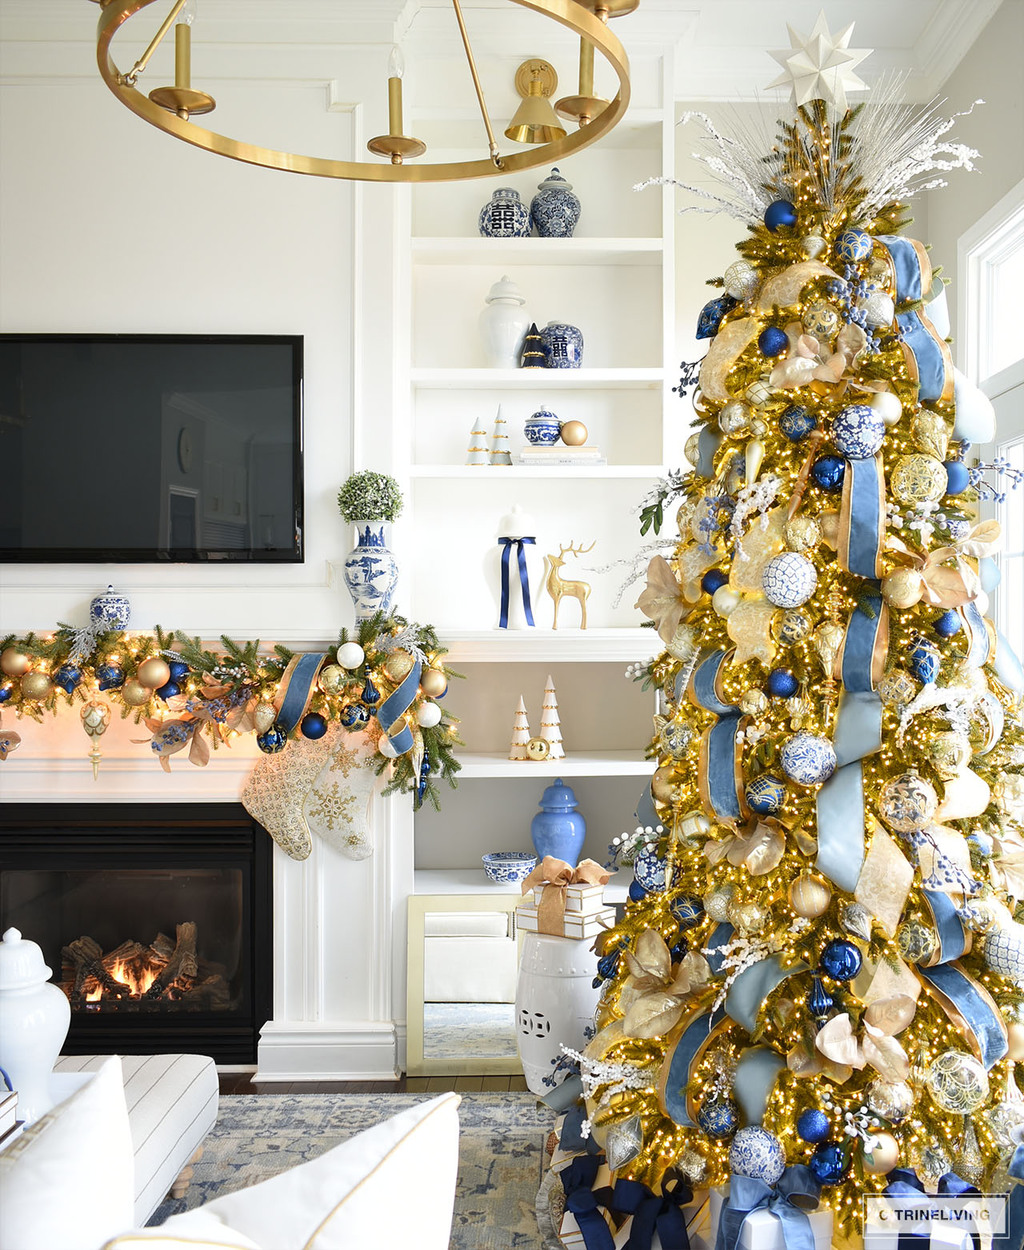 Beautiful blue and gold Christmas tree standing in front of builtin bookshelves styled with blue, white and gold holiday decor.